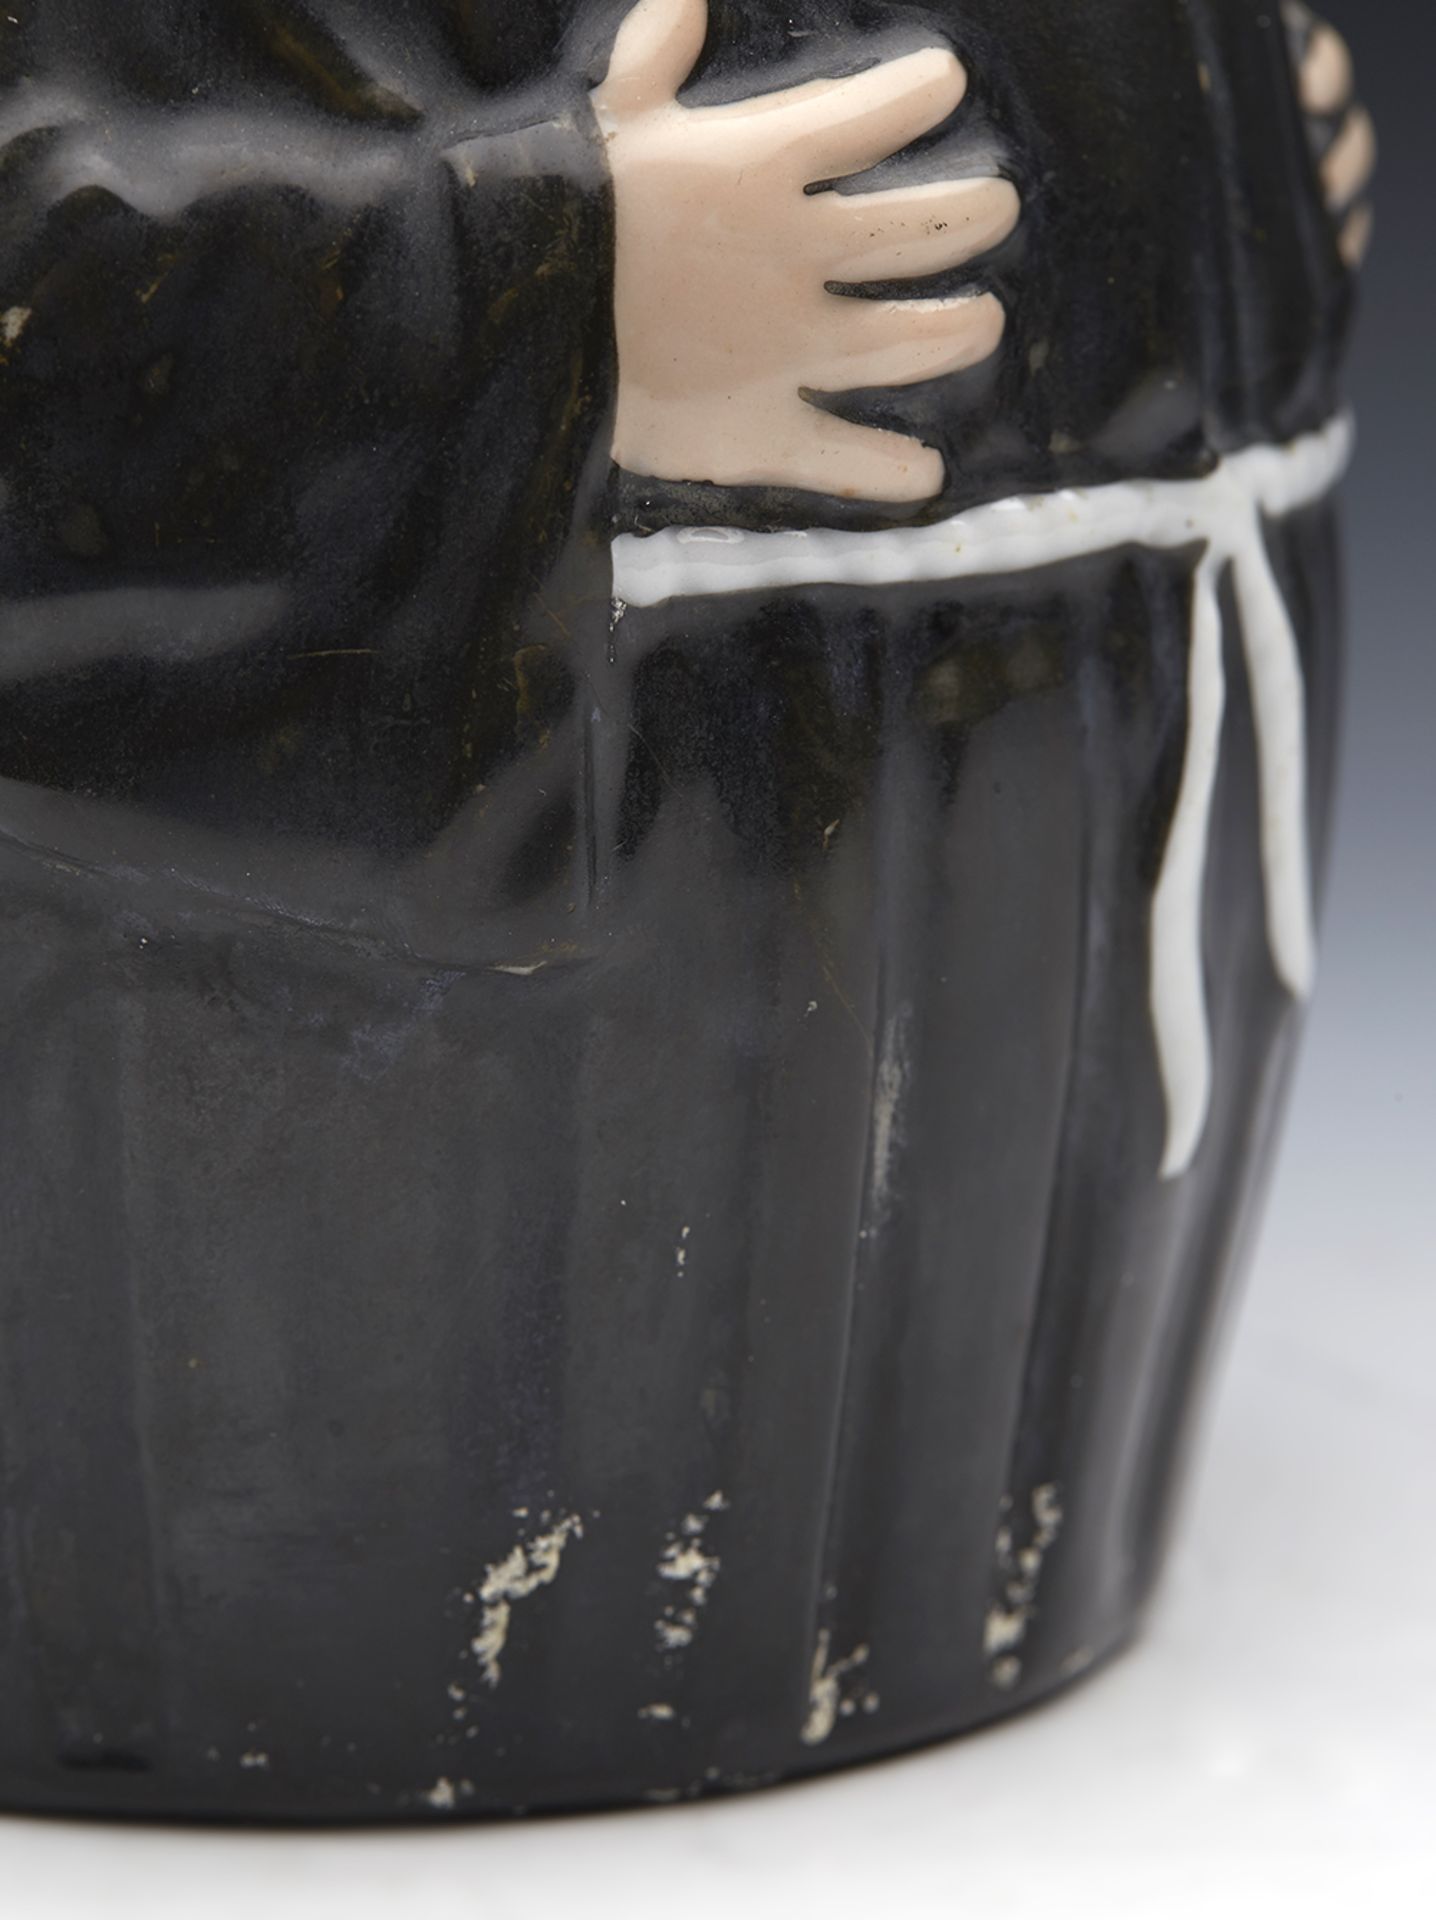 ANTIQUE GERMAN NUN BEER STEIN WITH LITHOPANE BASE 19TH C. - Image 8 of 12